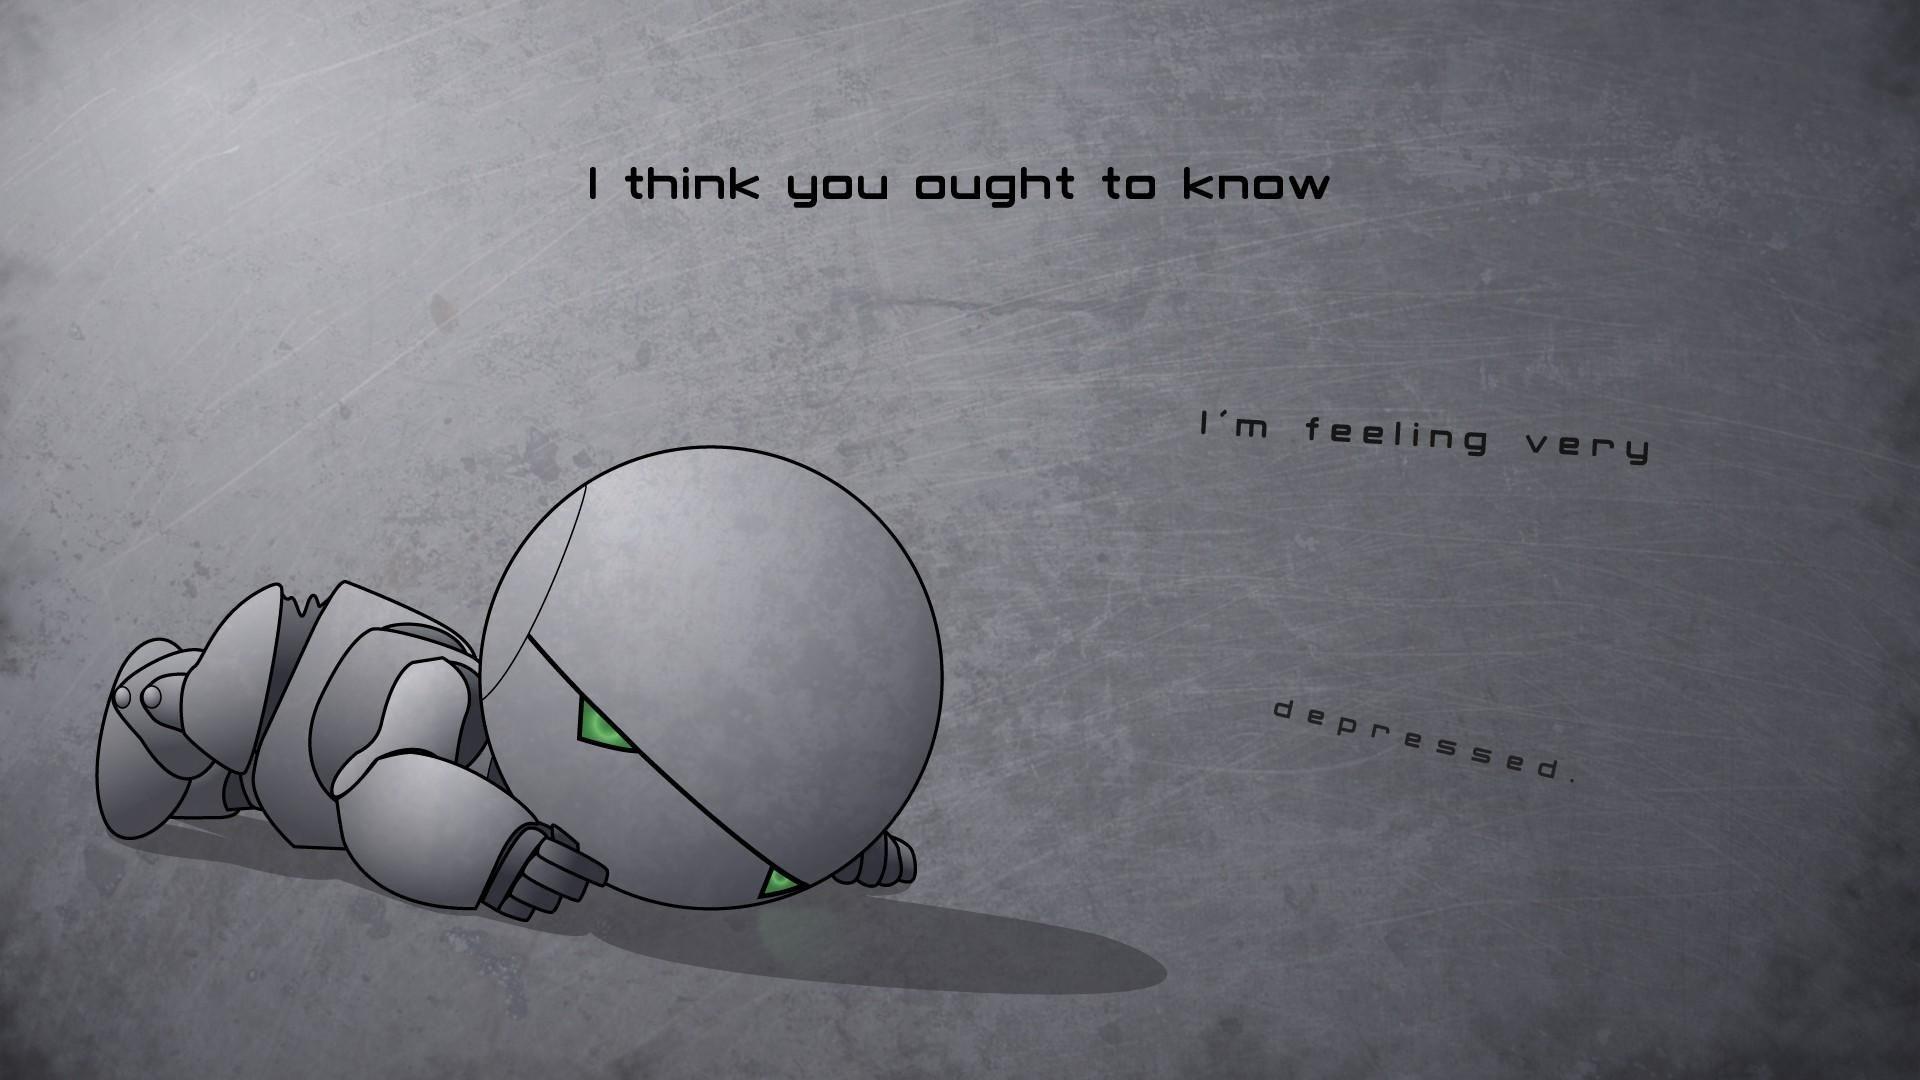 Android hitchhikers guide to galaxy androids depression wallpaper